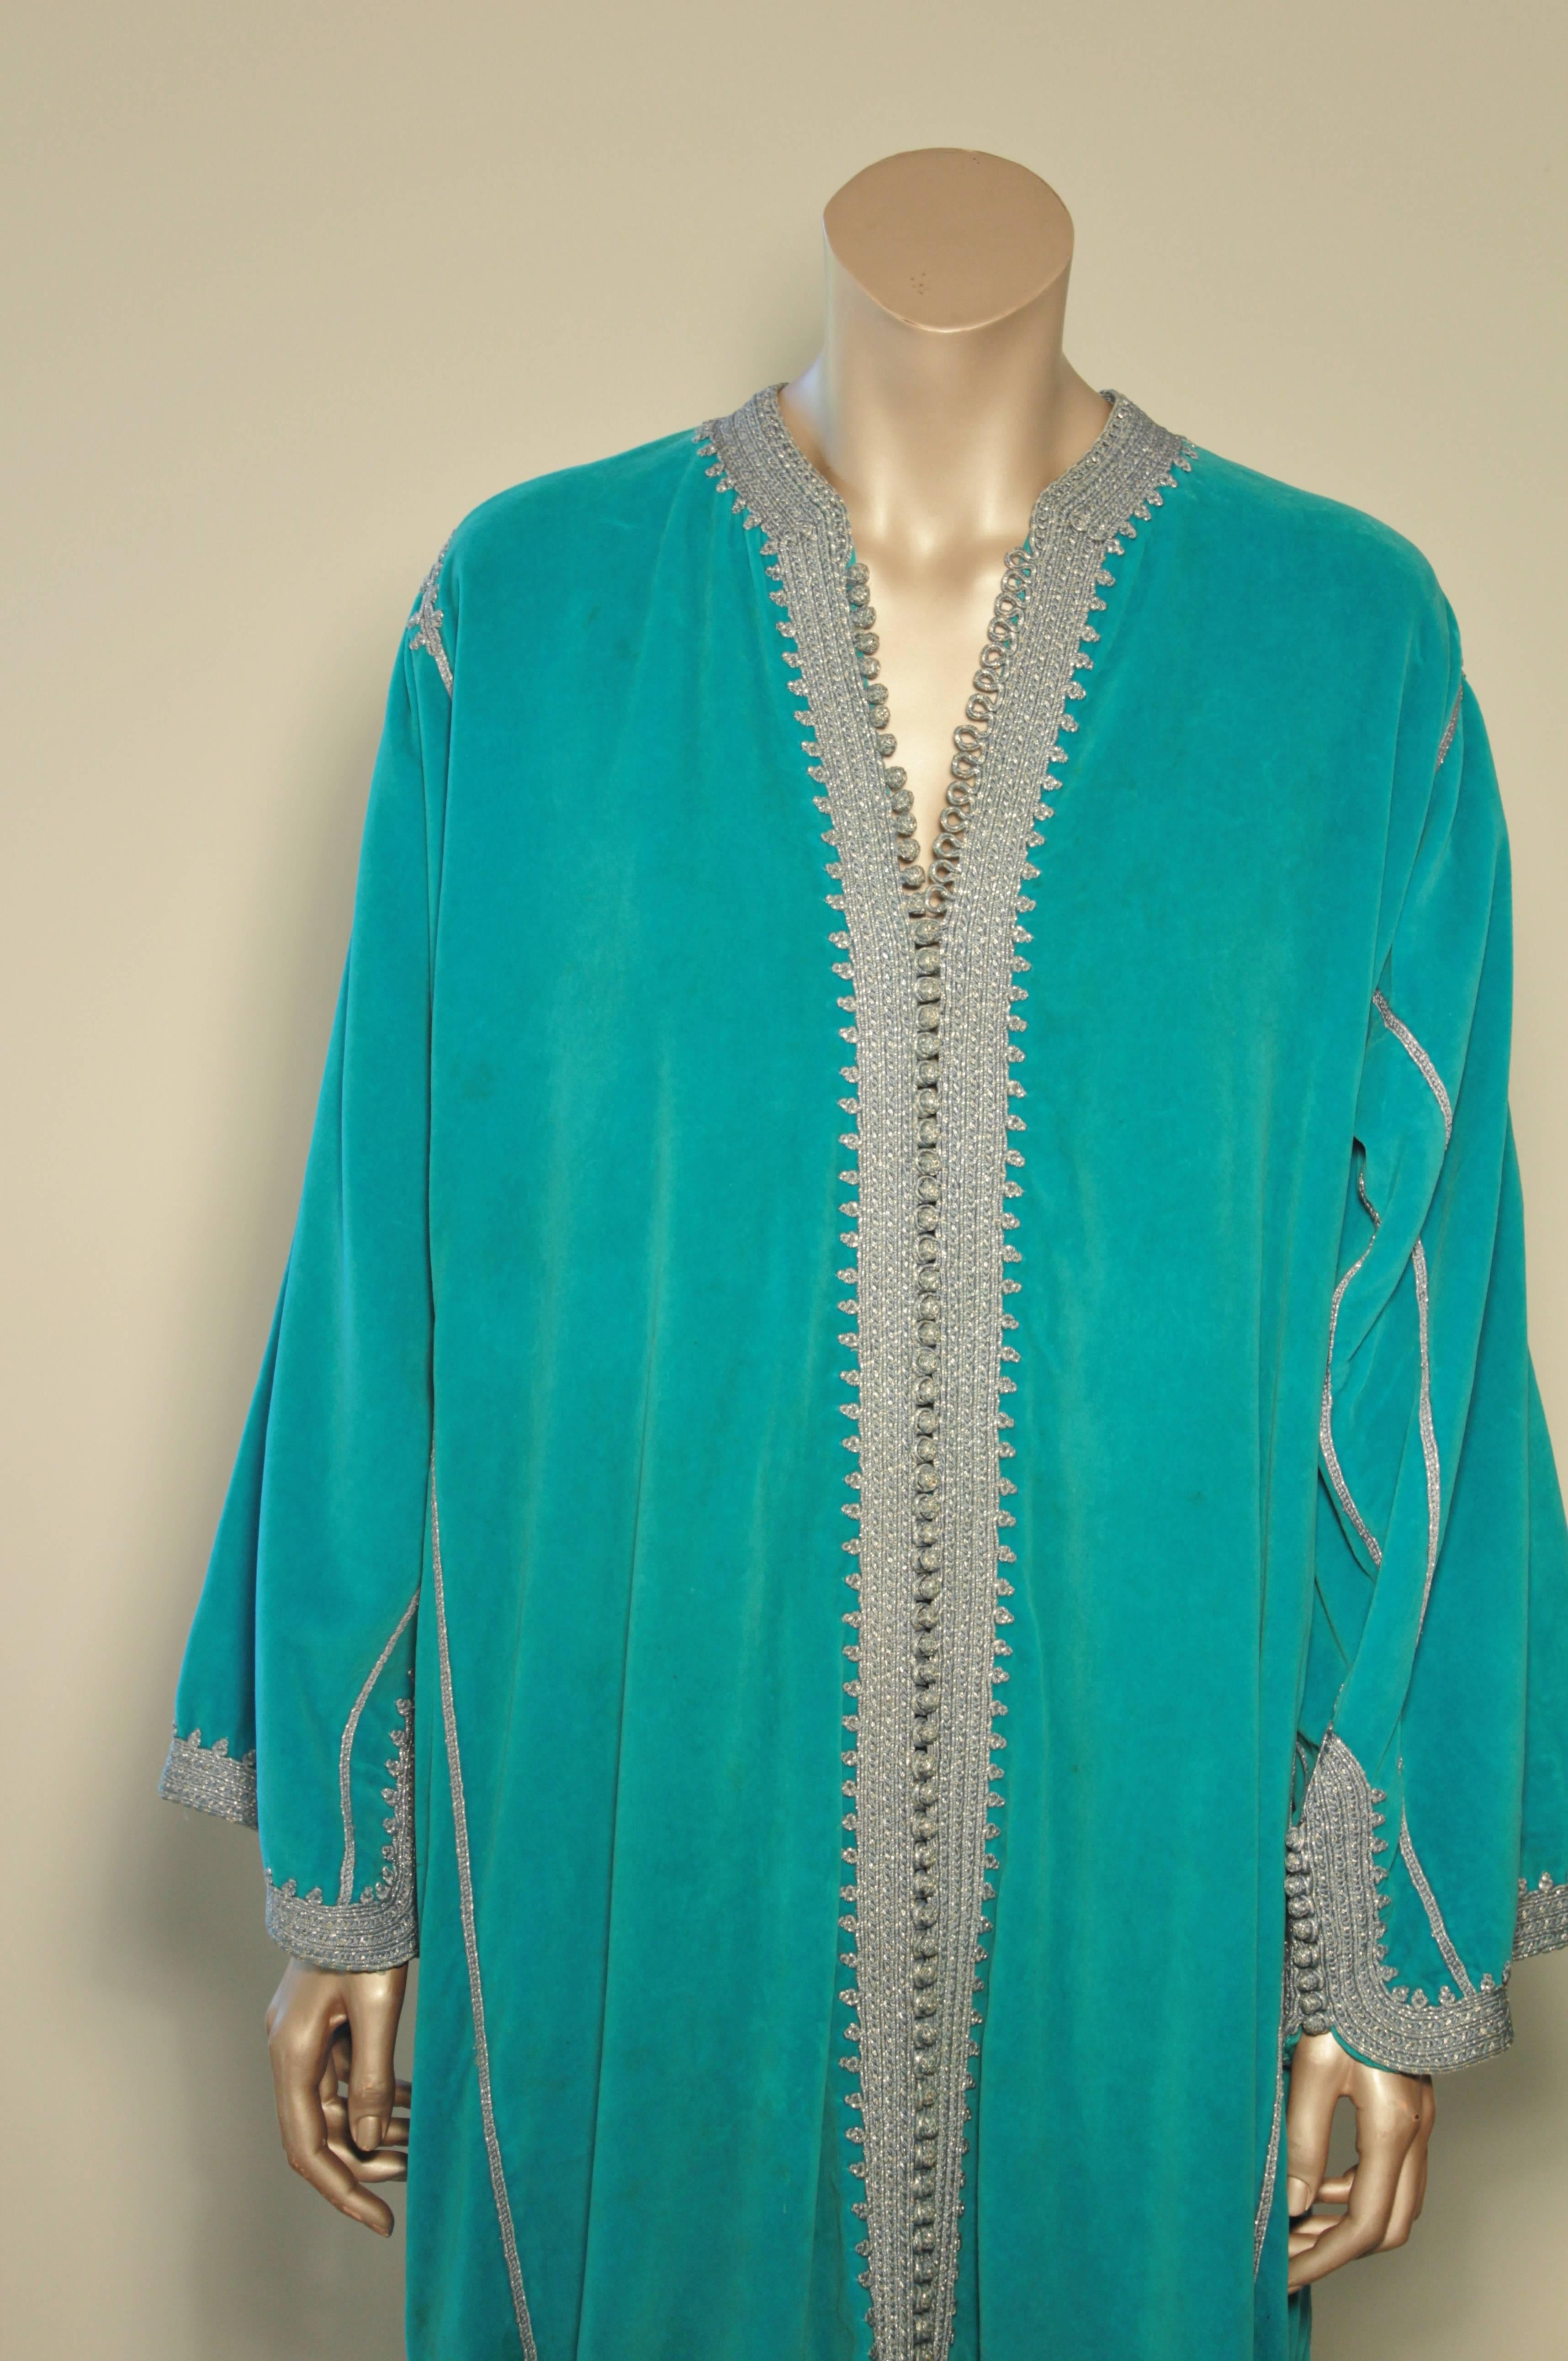 Artisanal handcrafted vintage velvet blue turquoise Moroccan Kaftan featuring thread in metallic silver.
Slightly flared sleeves.
This Arabic style caftan was handmade in Morocco during the 1970s.
Fortuny style, fully lined unisex.
The front of the